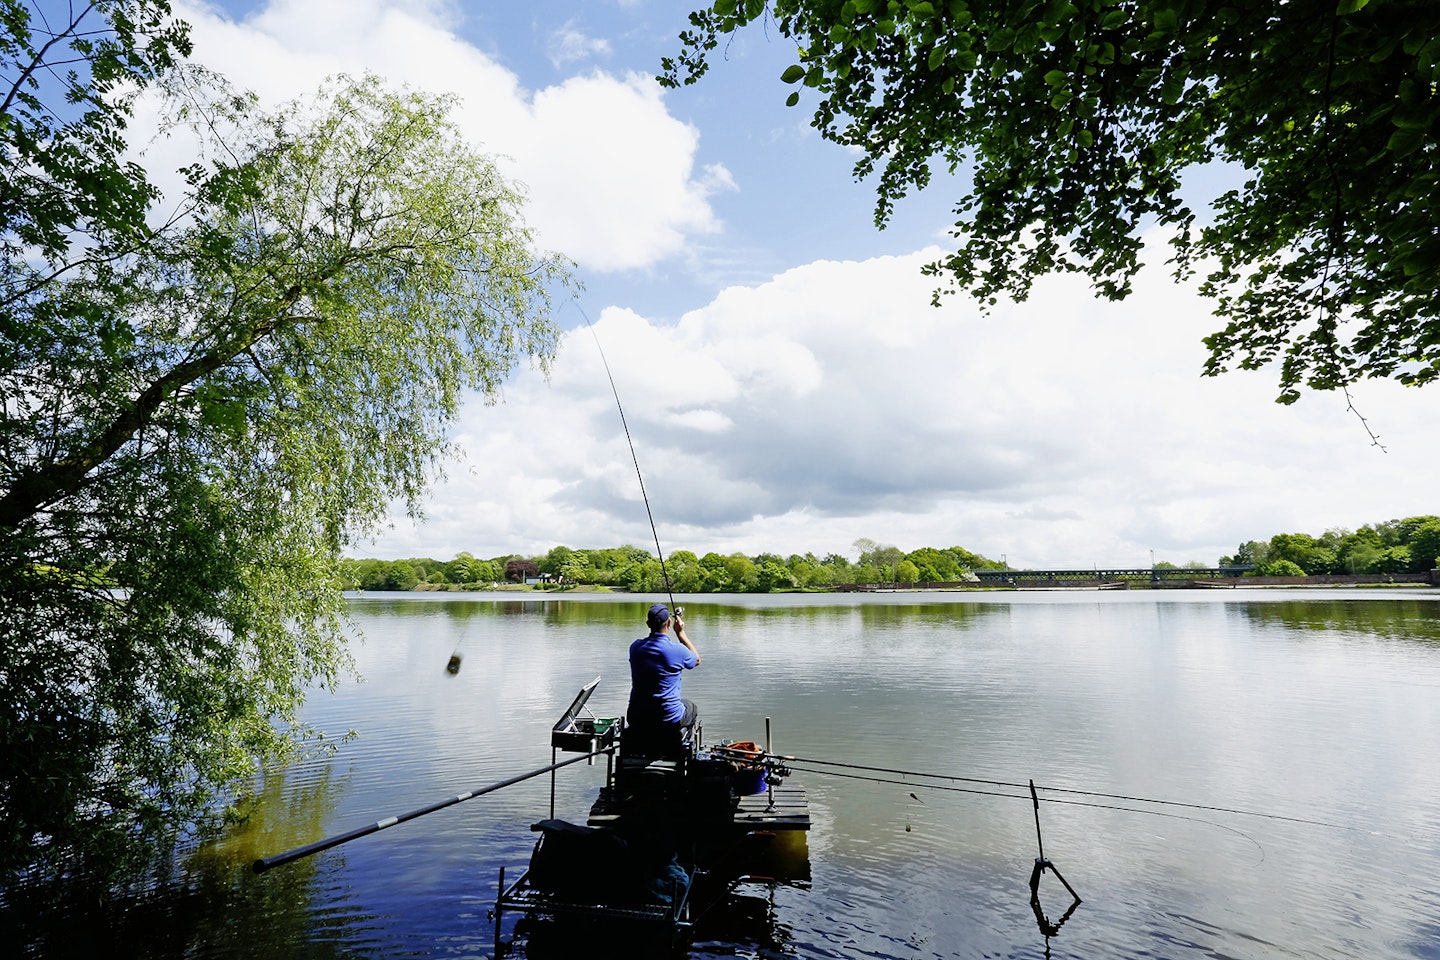 Tackle shop buys 136 junior angling club permits to hand out for